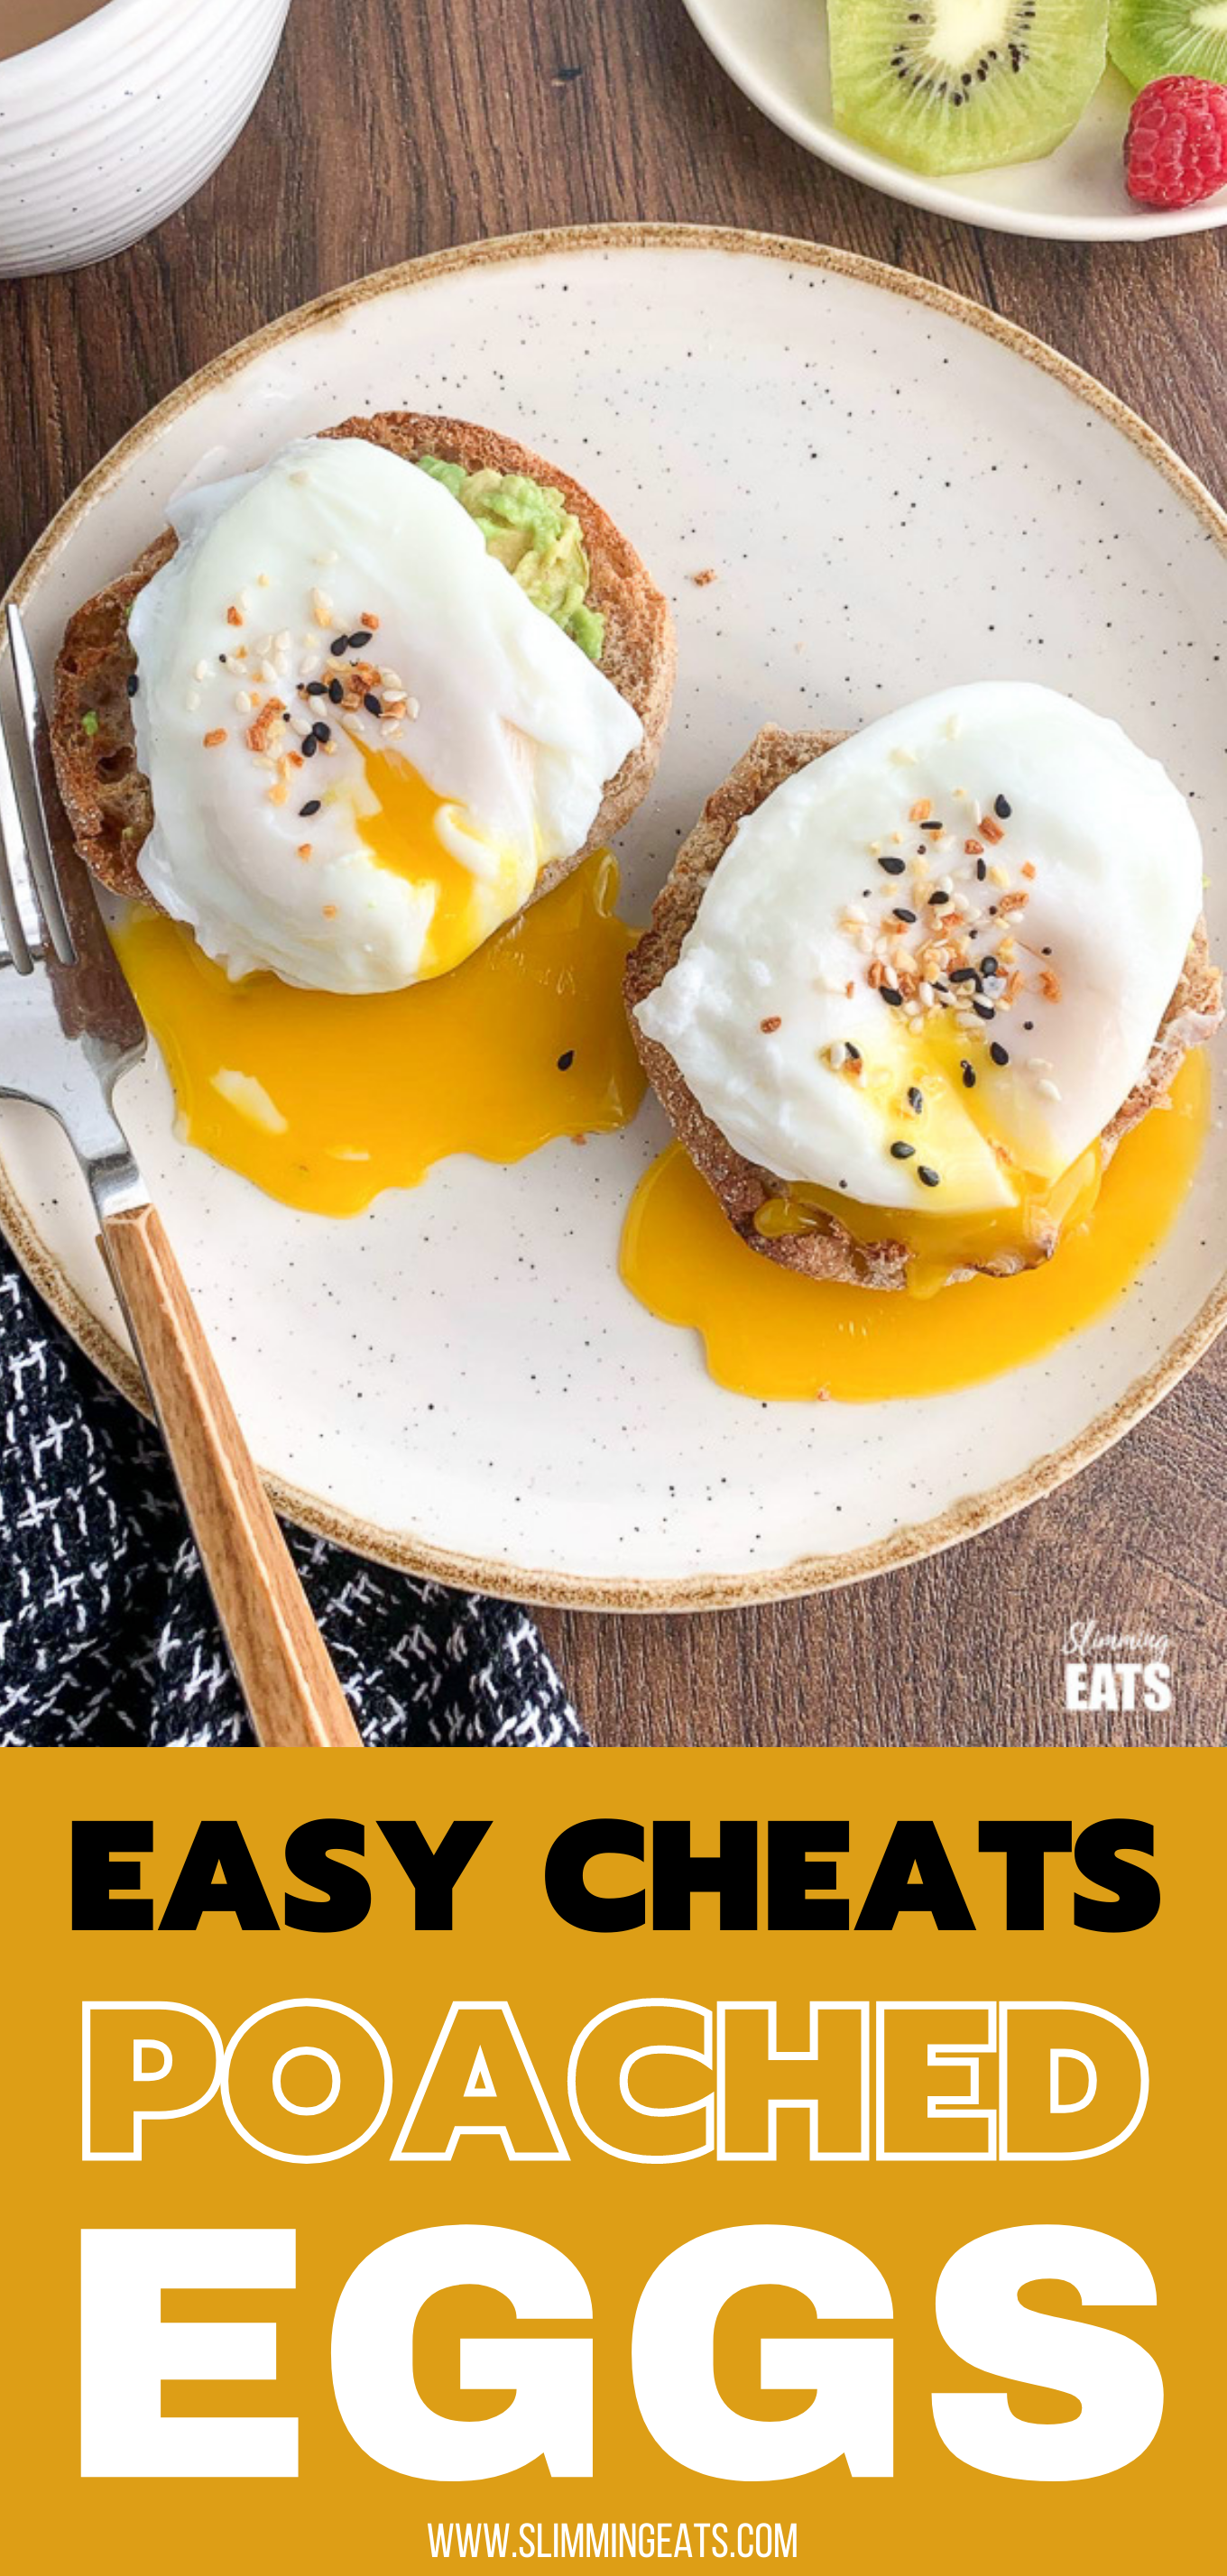 easy cheats poached eggs on avocado english toasted muffins pin image